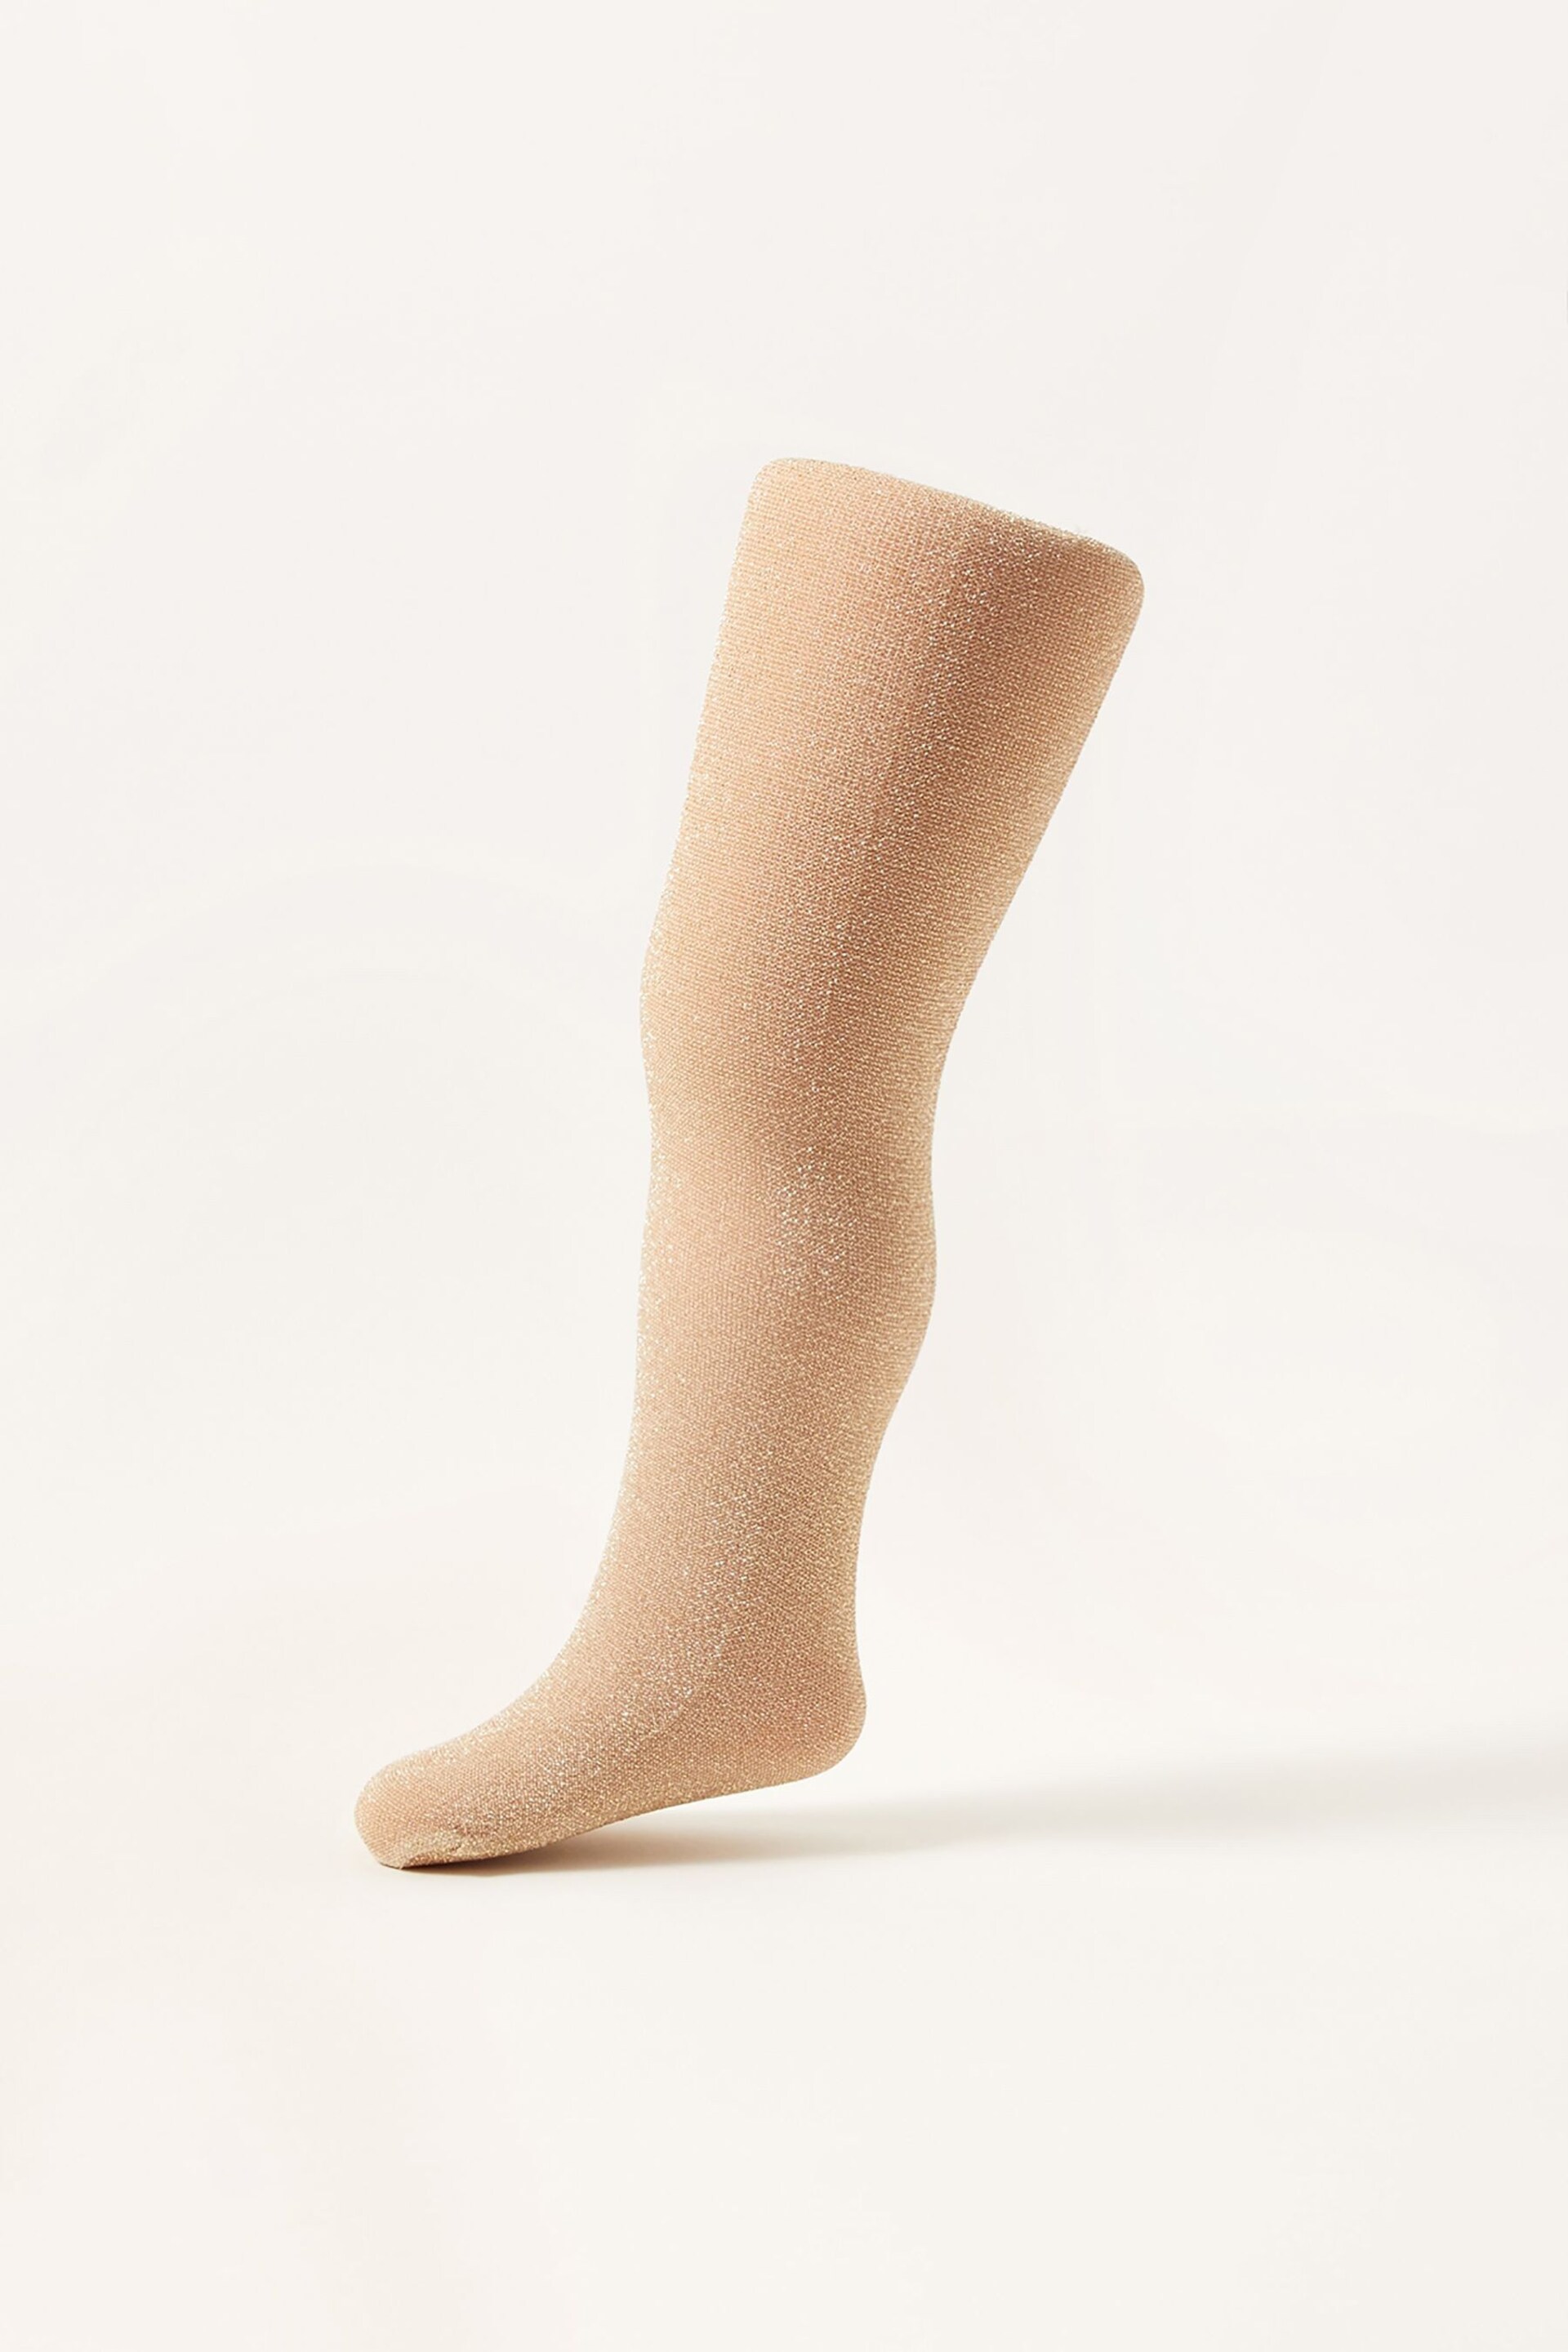 Monsoon Gold Light Baby Sparkly Tights - Image 1 of 3